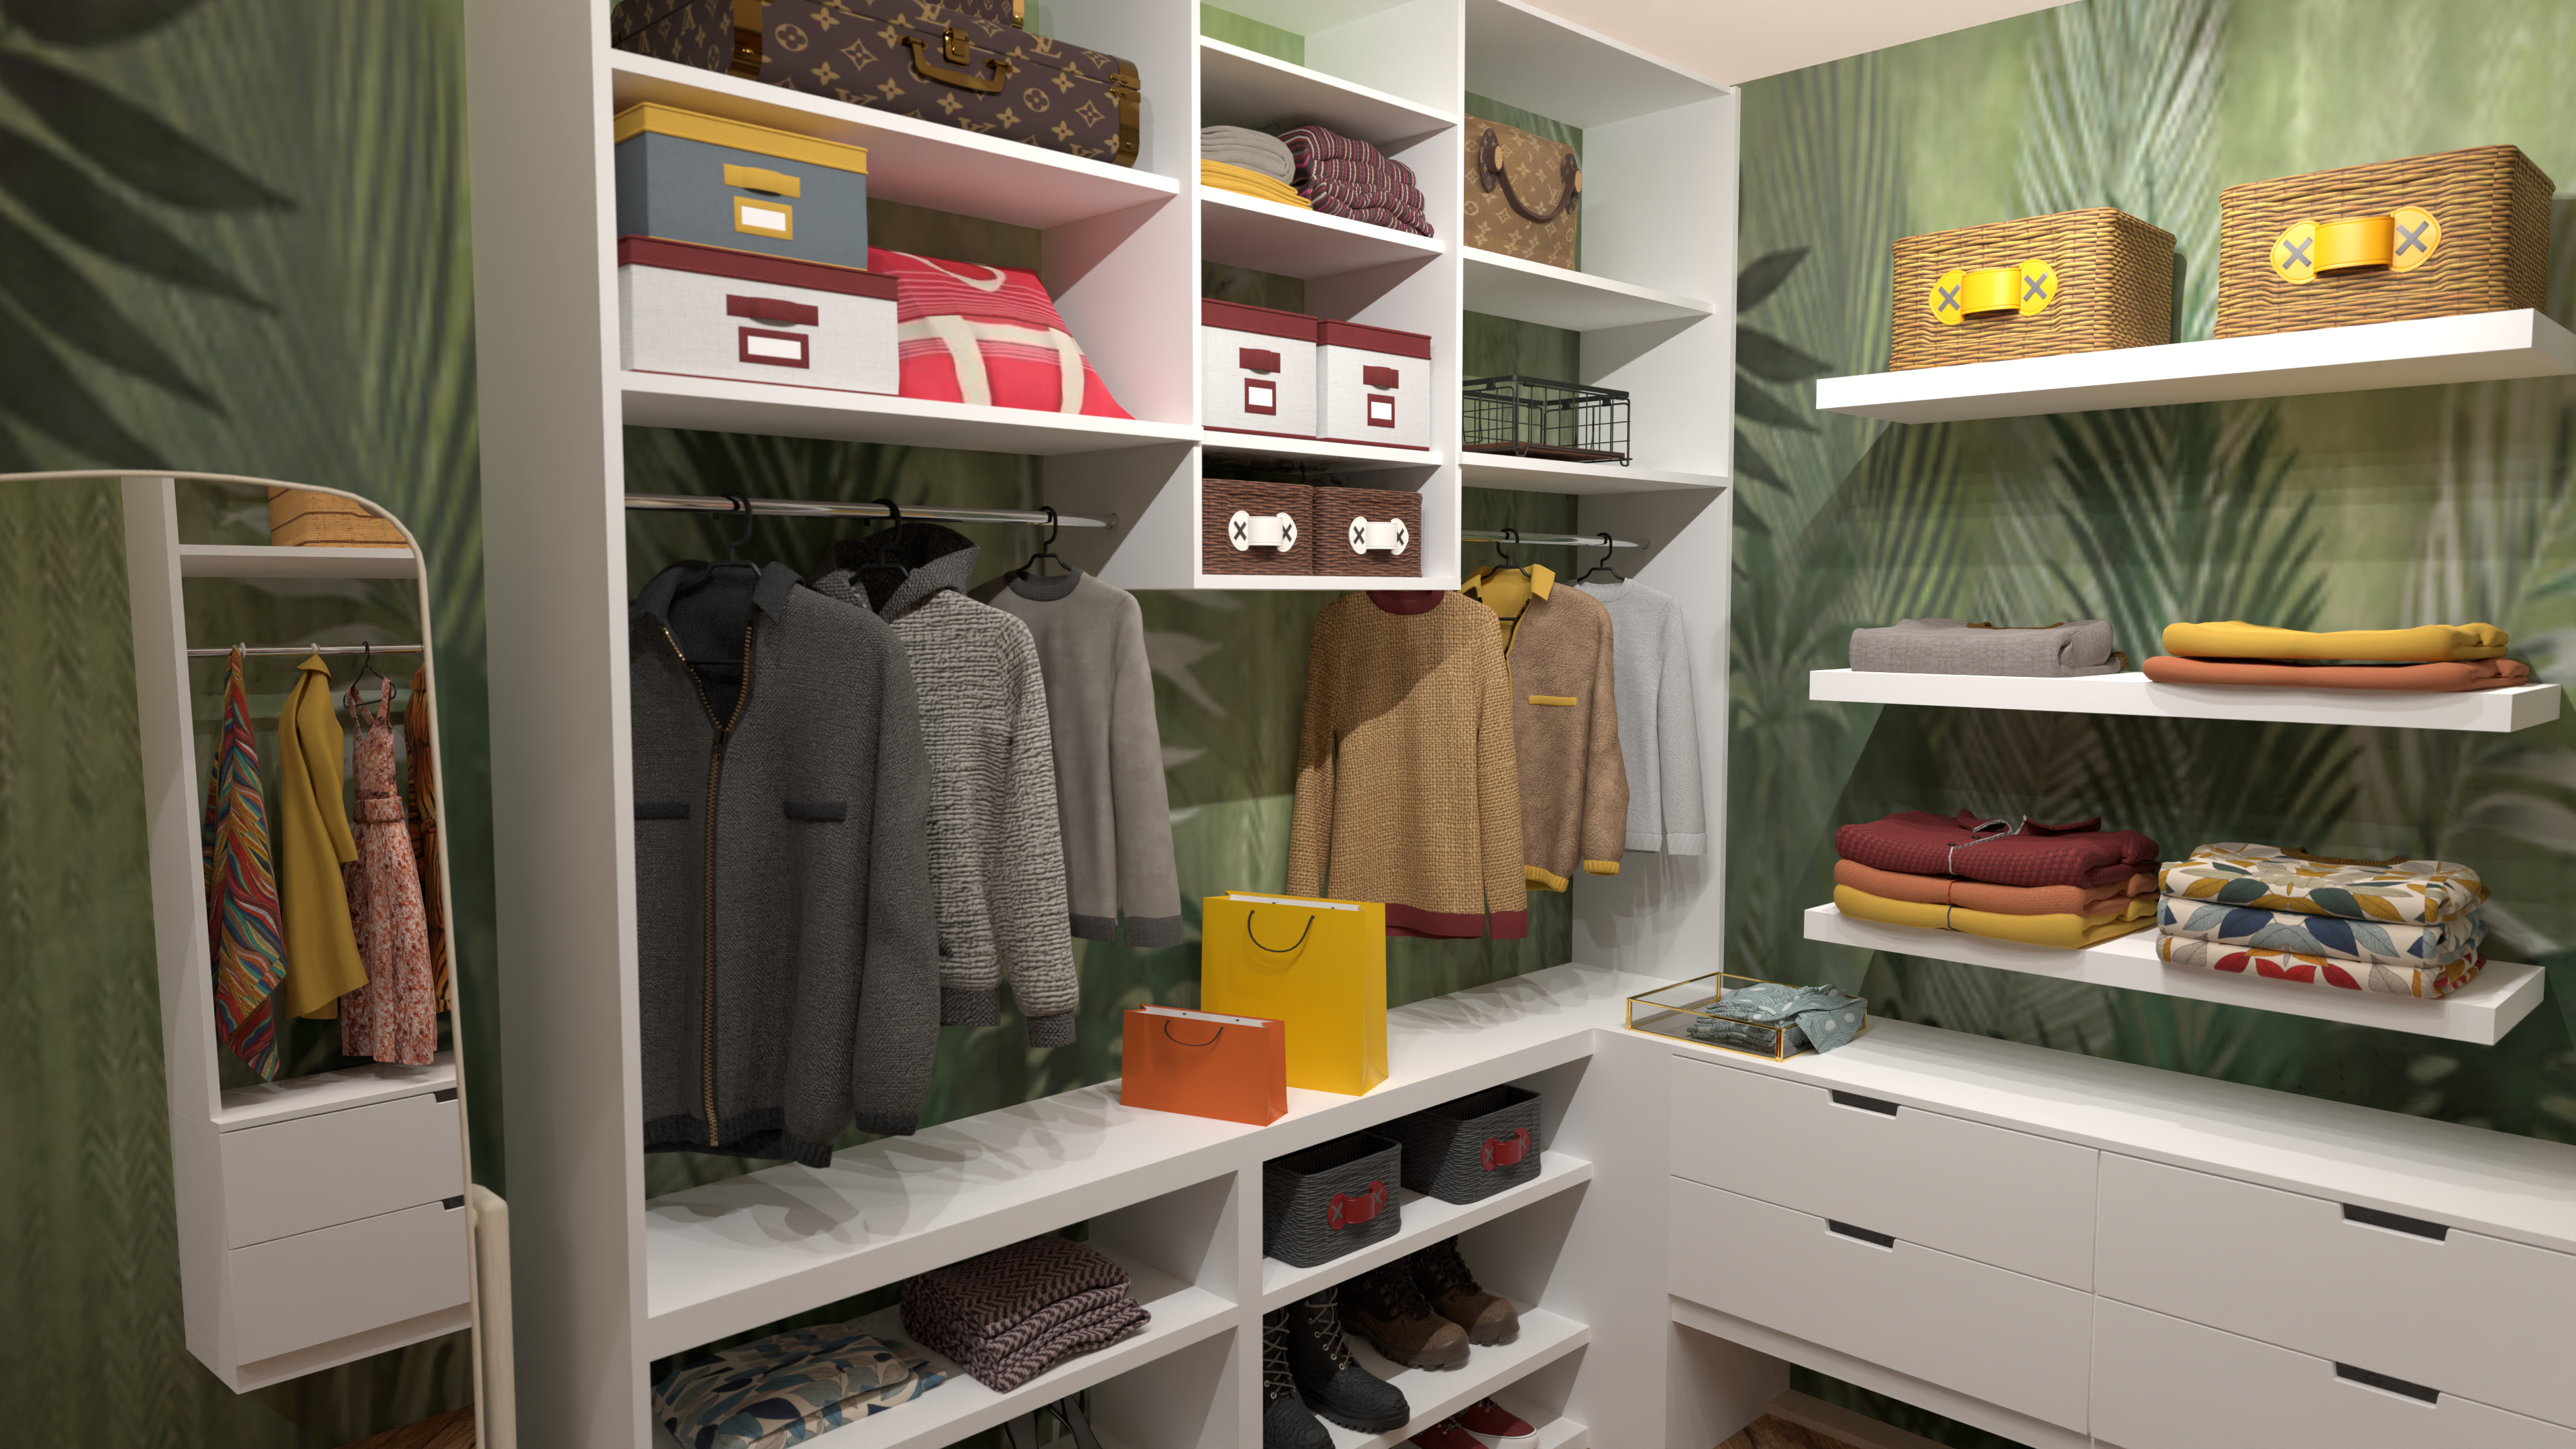 Walk-in closet #2 12889315 by Moonface image